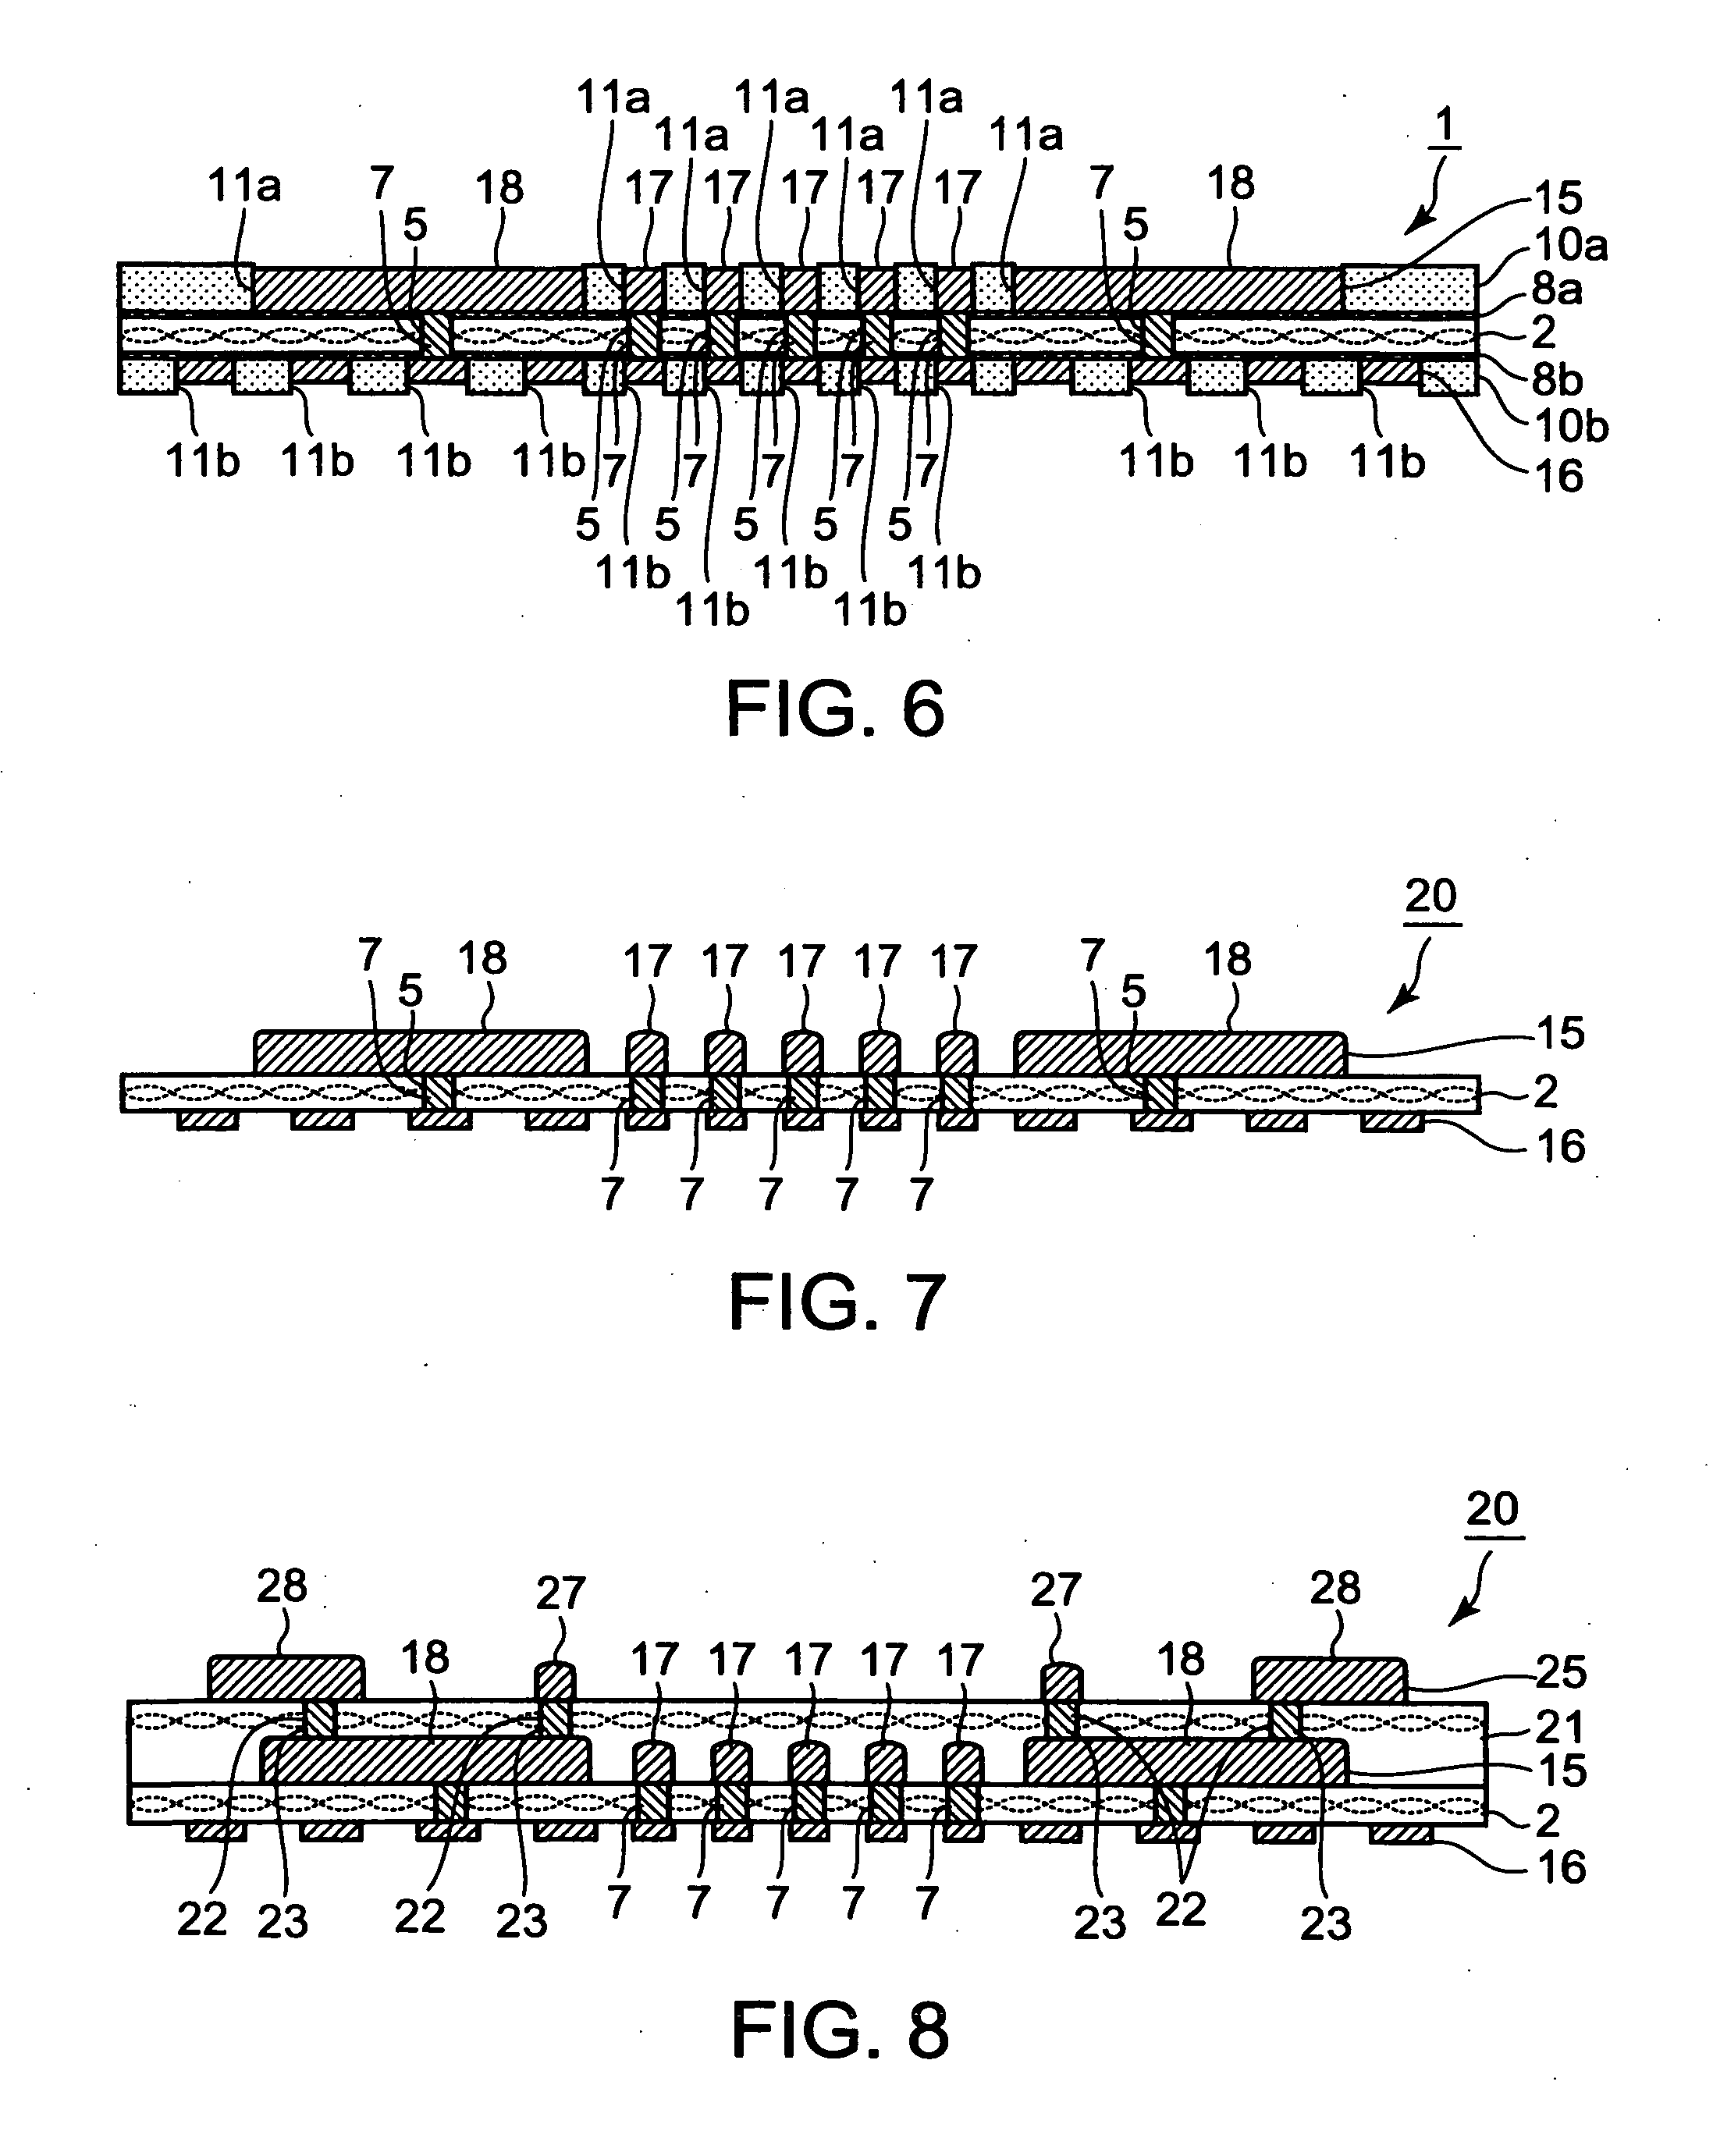 Printed circuit board, production method therefor, electronic-component carrier board using printed circuit board, and production method therefor